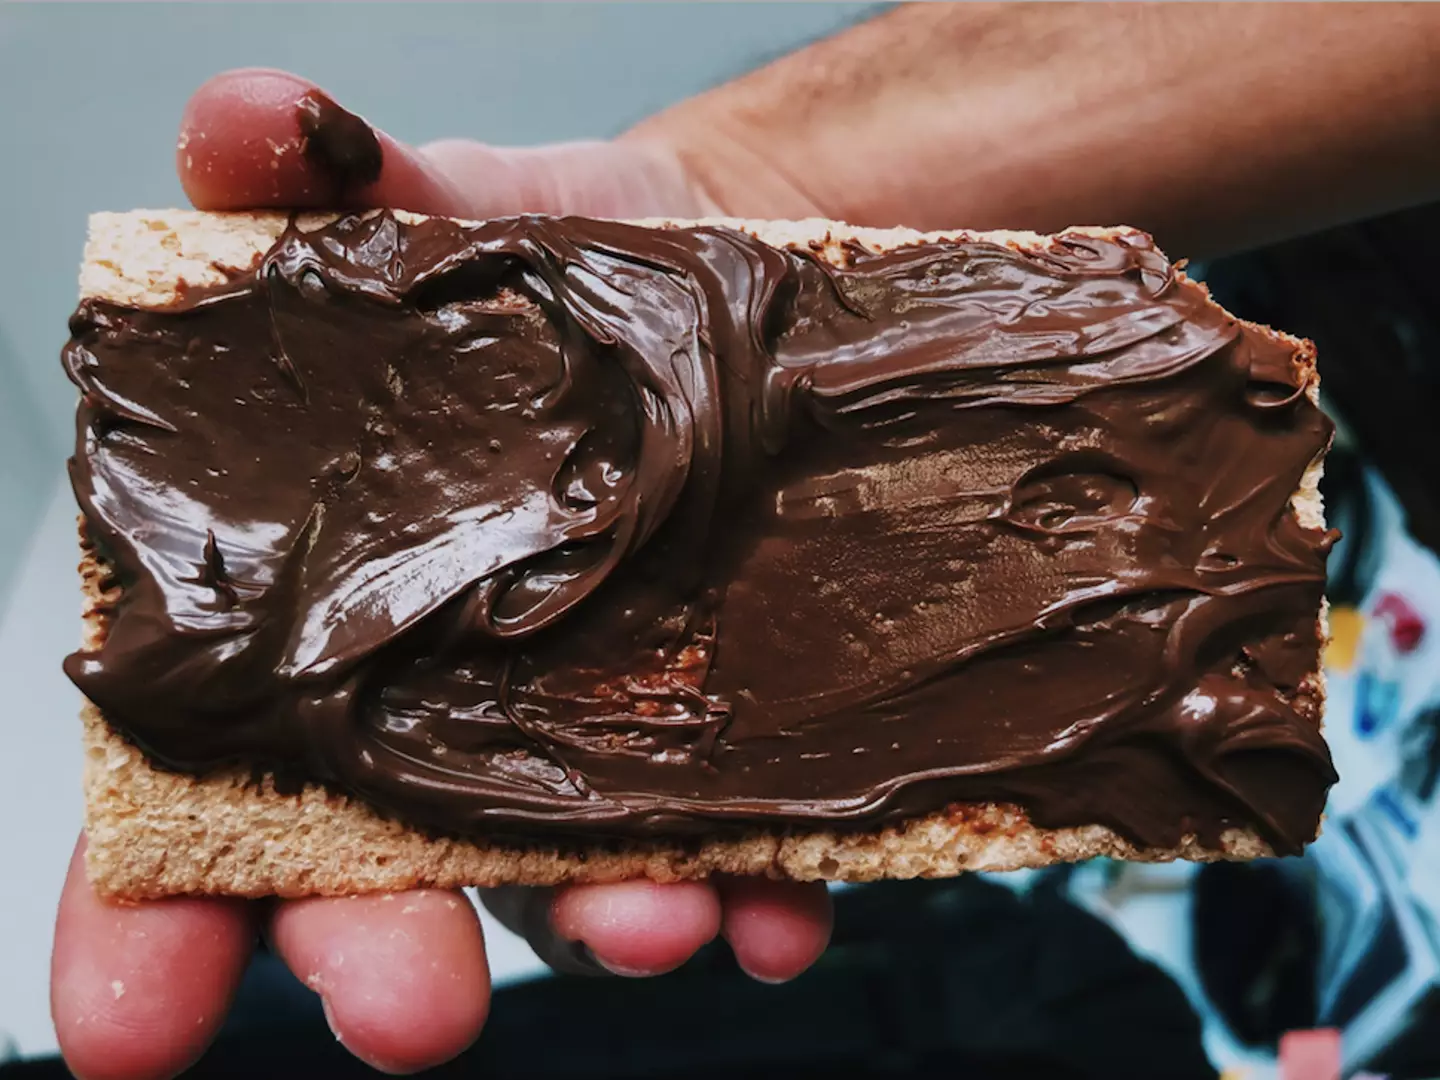 The best way to eat Nutella, obviously (